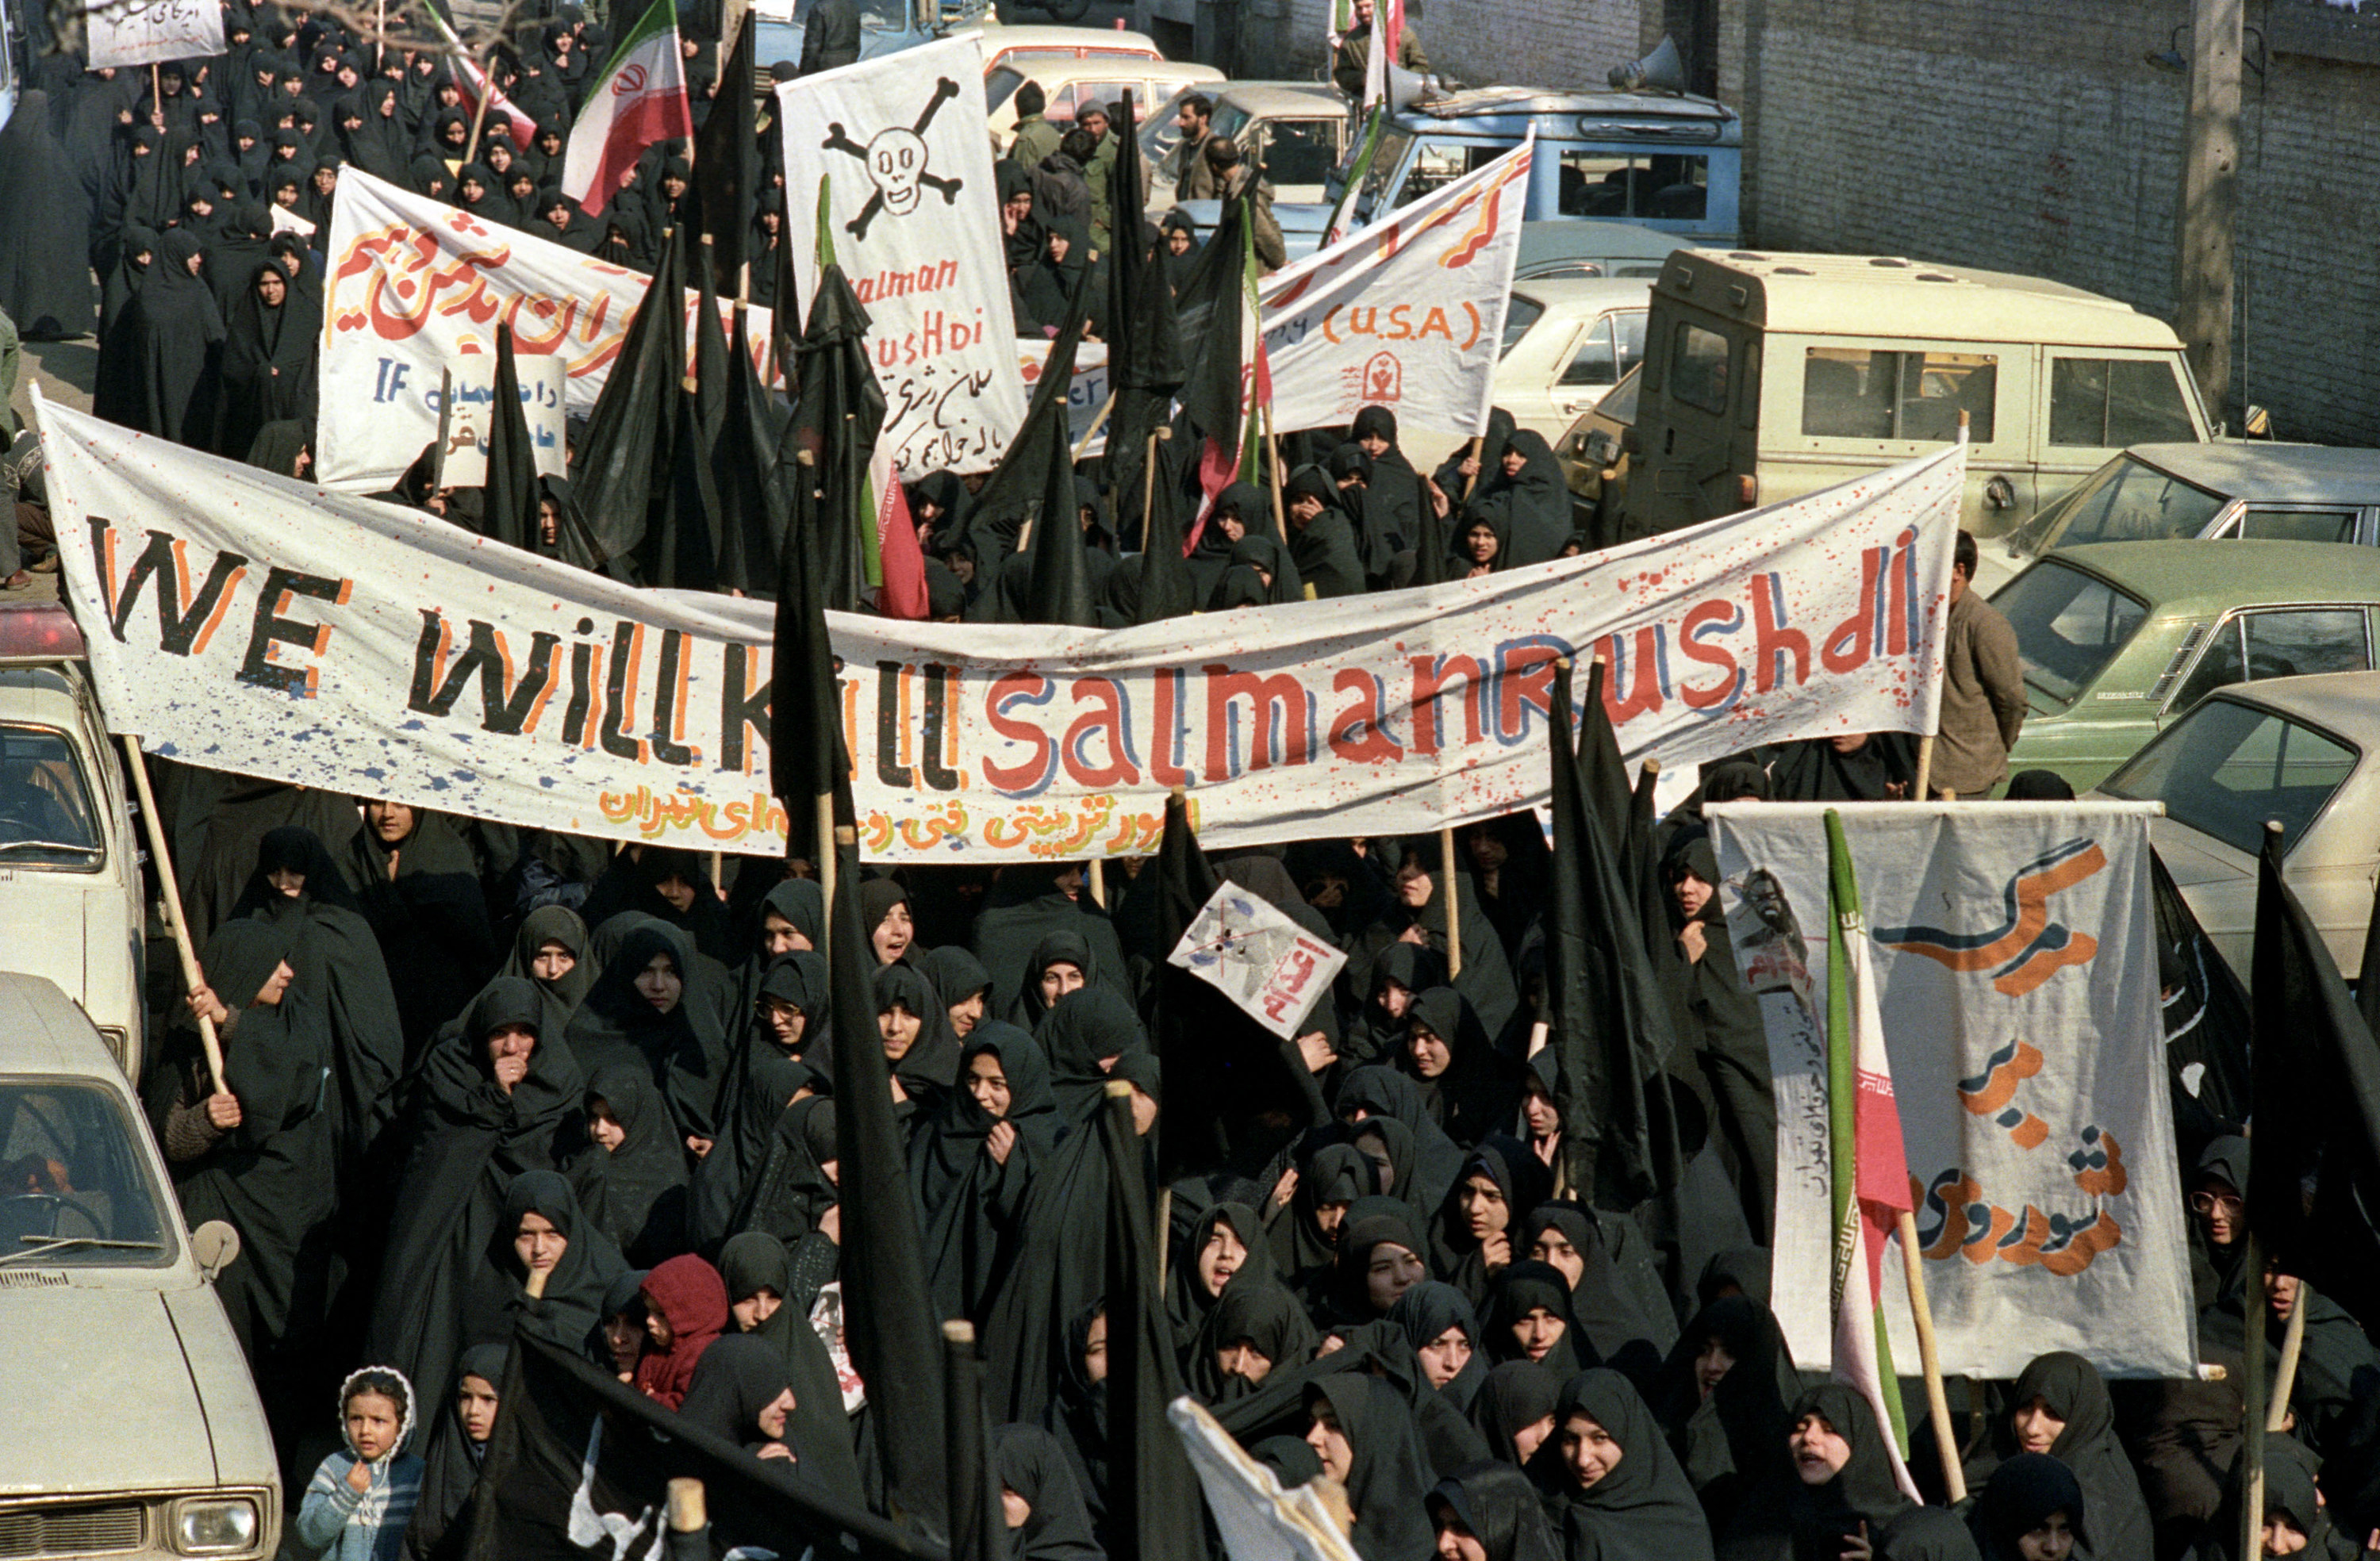 A crowd of people dressed in black protest and hold signs reading &quot;we will kill salman rushdie&quot;